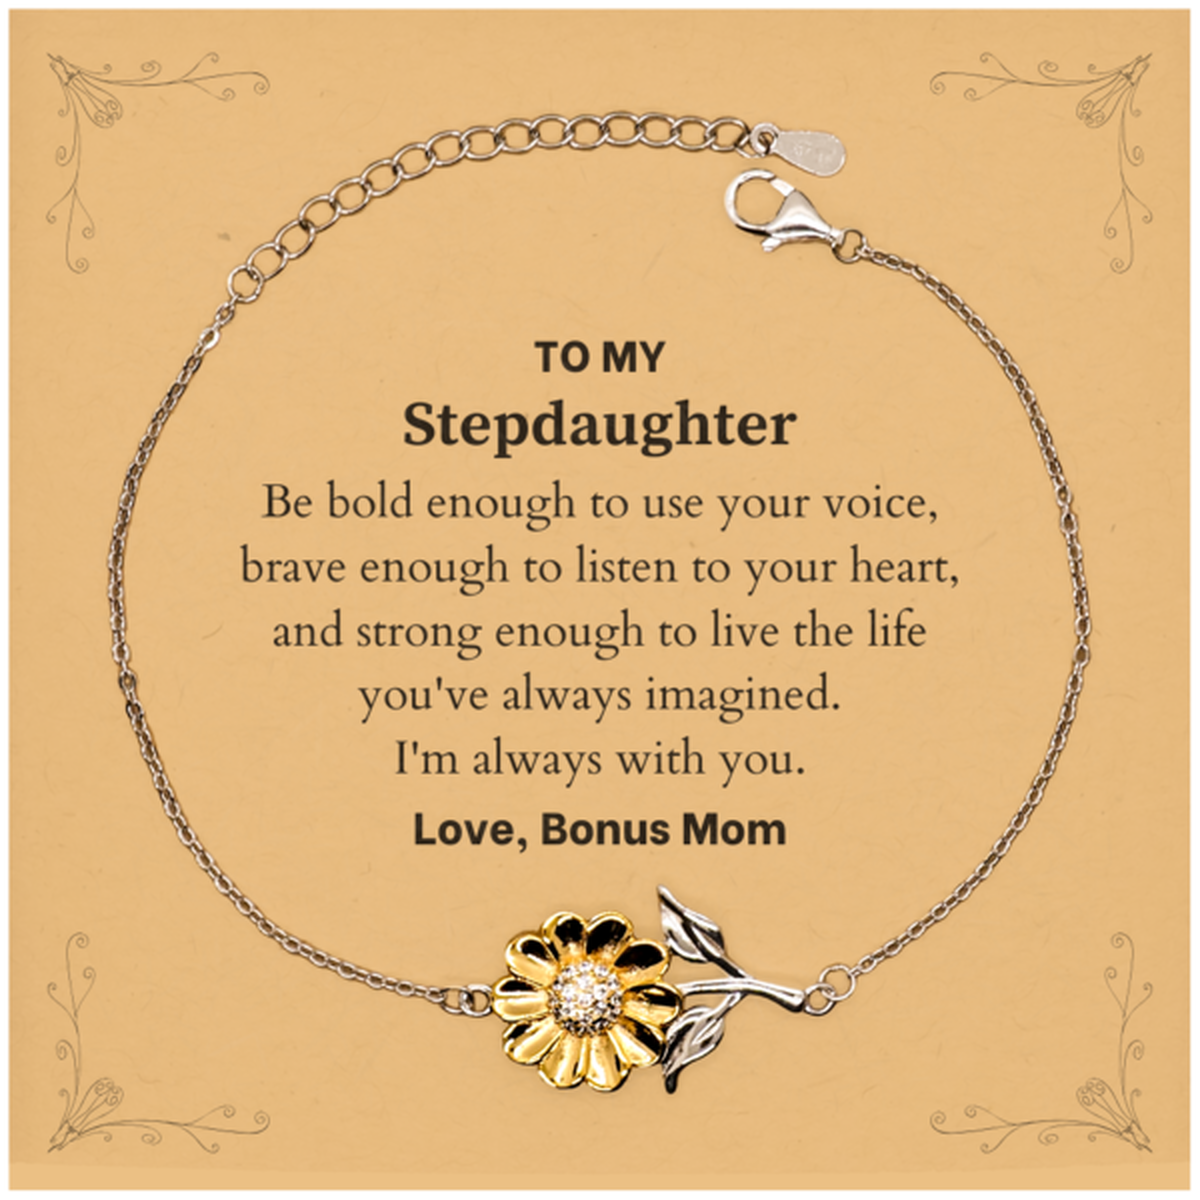 Keepsake Stepdaughter Sunflower Bracelet Gift Idea Graduation Christmas Birthday Stepdaughter from Bonus Mom, Stepdaughter Be bold enough to use your voice, brave enough to listen to your heart. Love, Bonus Mom